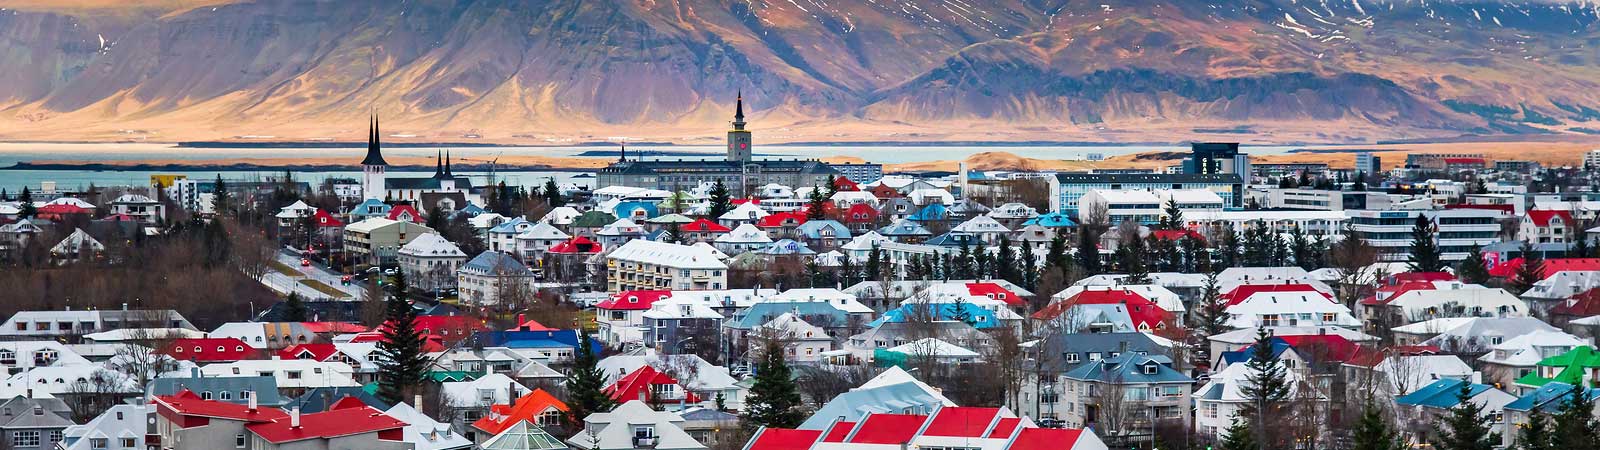 best escorted tours of iceland